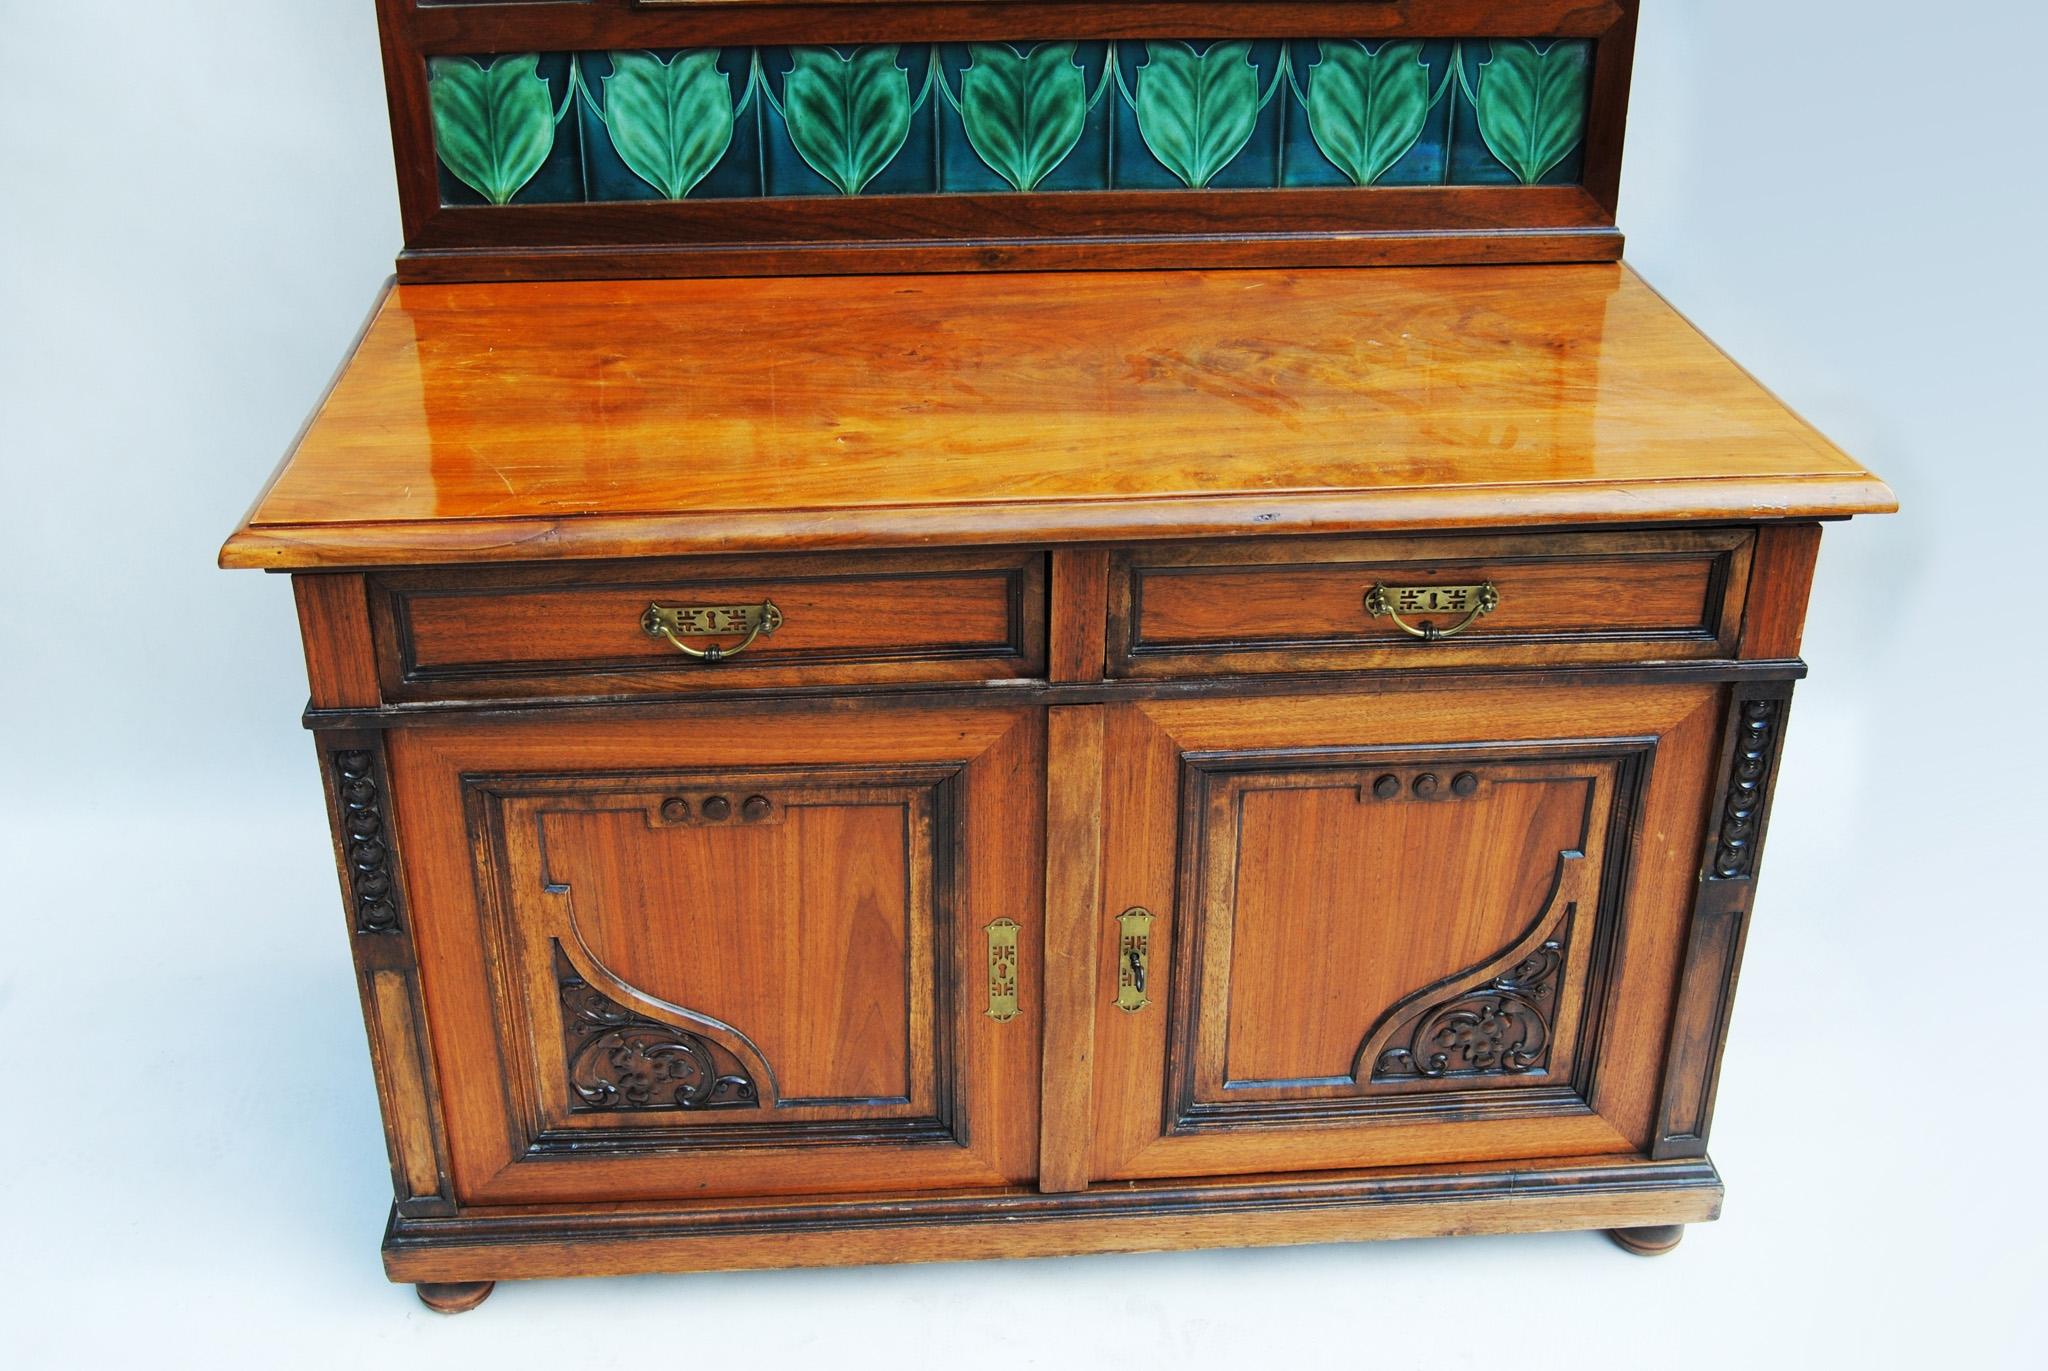 Czech Art Nouveau Dressing Table with Mirror, Walnut, Restored, 1910s In Good Condition For Sale In Horomerice, CZ